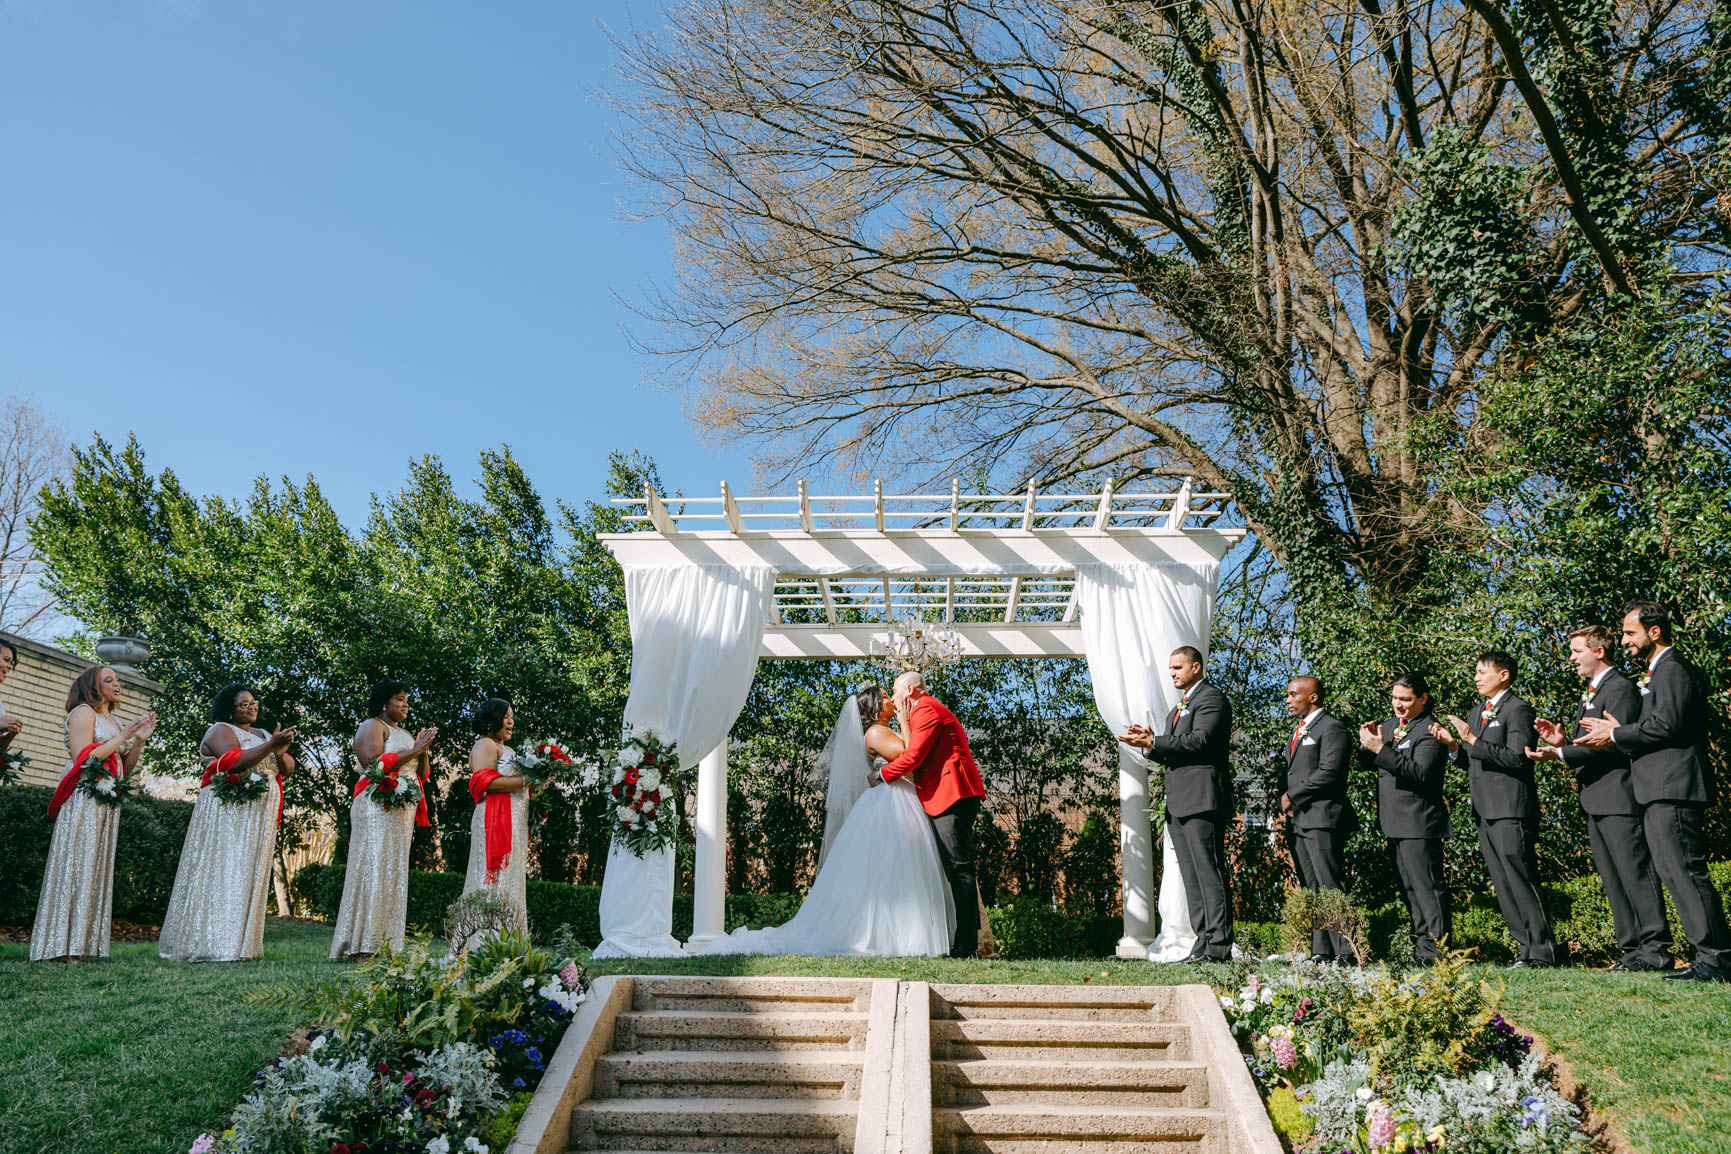 Bride and groom first kiss at Separk Mansion in Gastonia NC shot by Nhieu Tang Photography | nhieutang.com